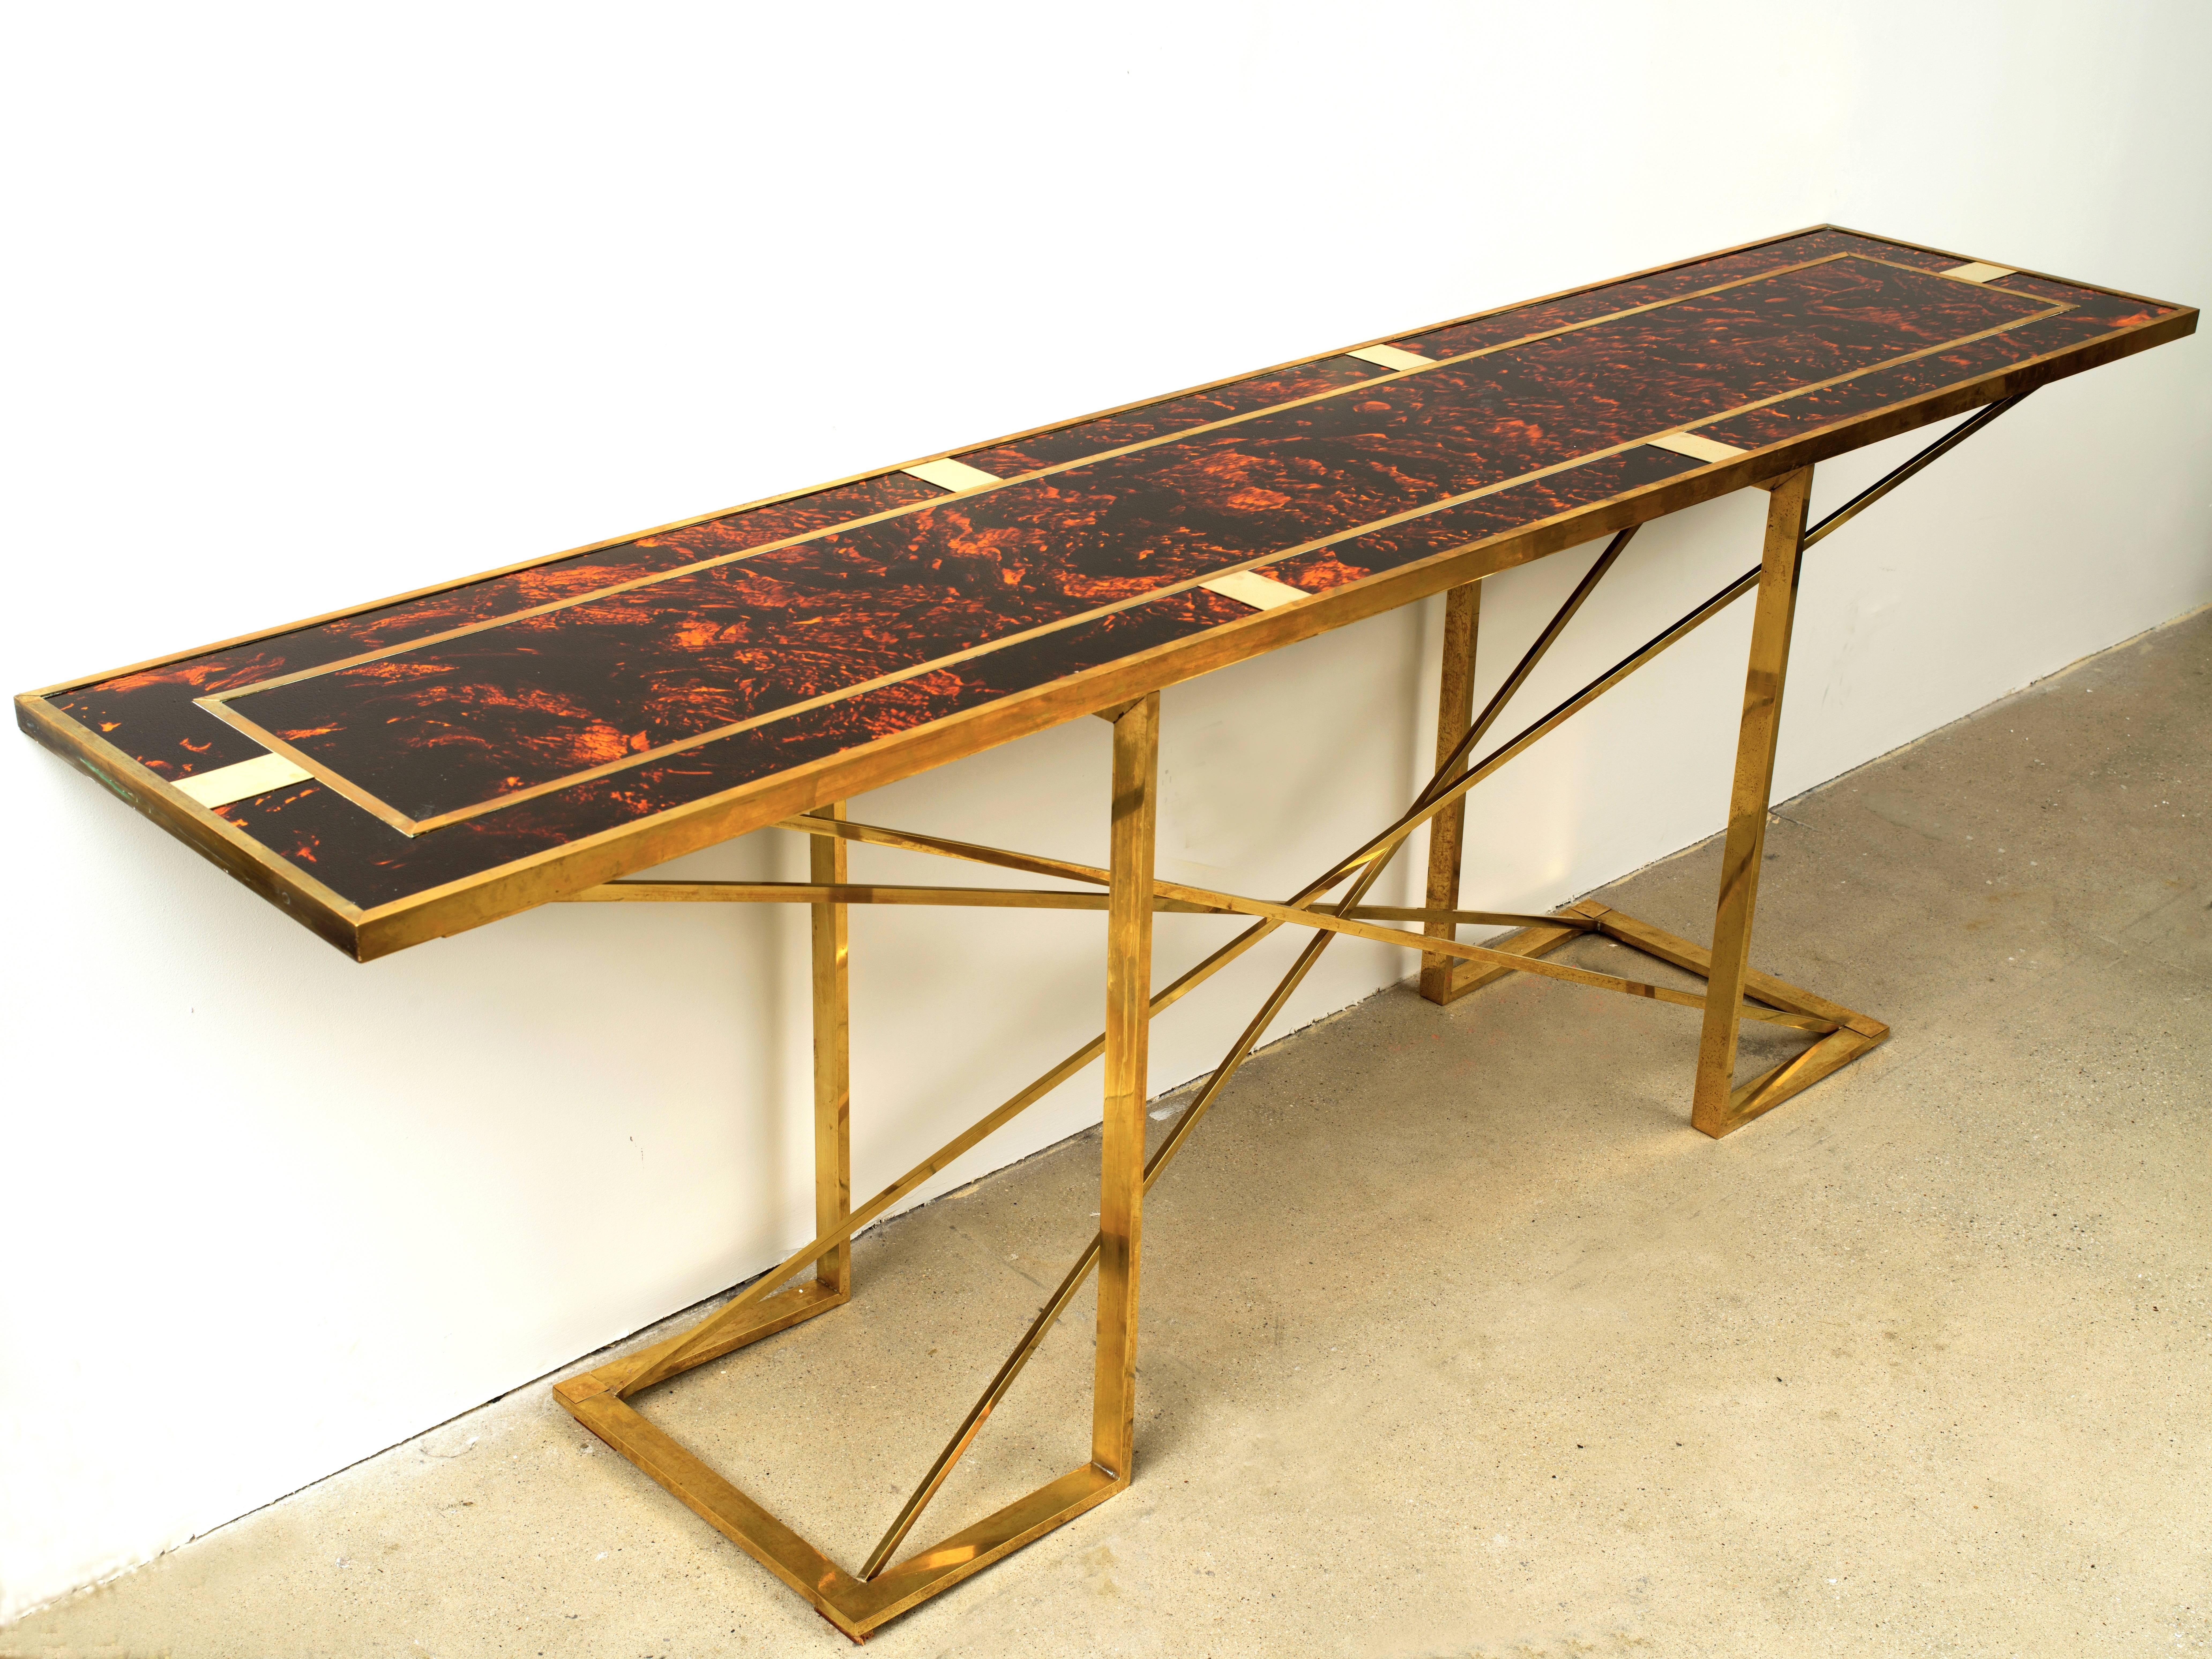 Stunning and dramatic is this large faux tortoise and brass console table attributed to Romeo Rega. The combination of the bright faux tortoise resin with the geometric lines of the brass creates a unique table to say the least. Found in Italy this